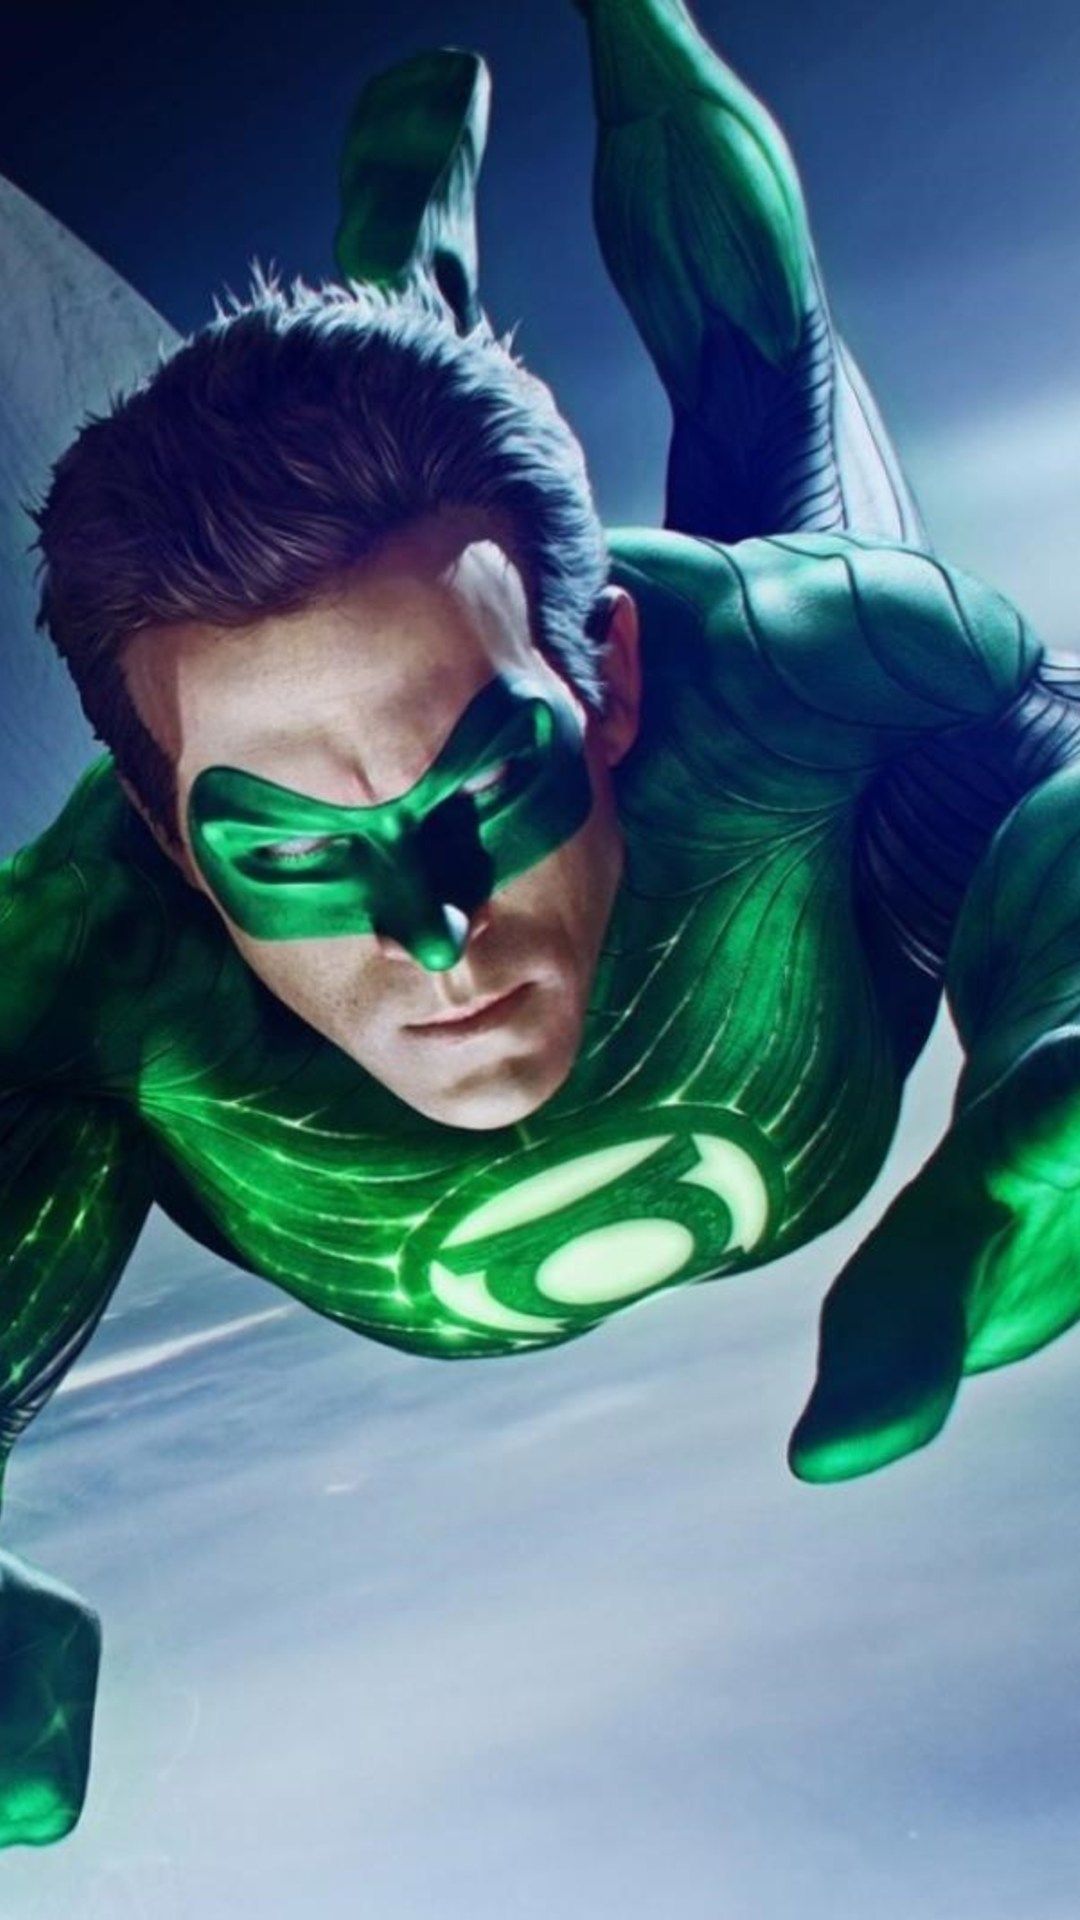 1080x1920 green lantern, super heroes, movies, justice league for iPhone 8 wallpaper